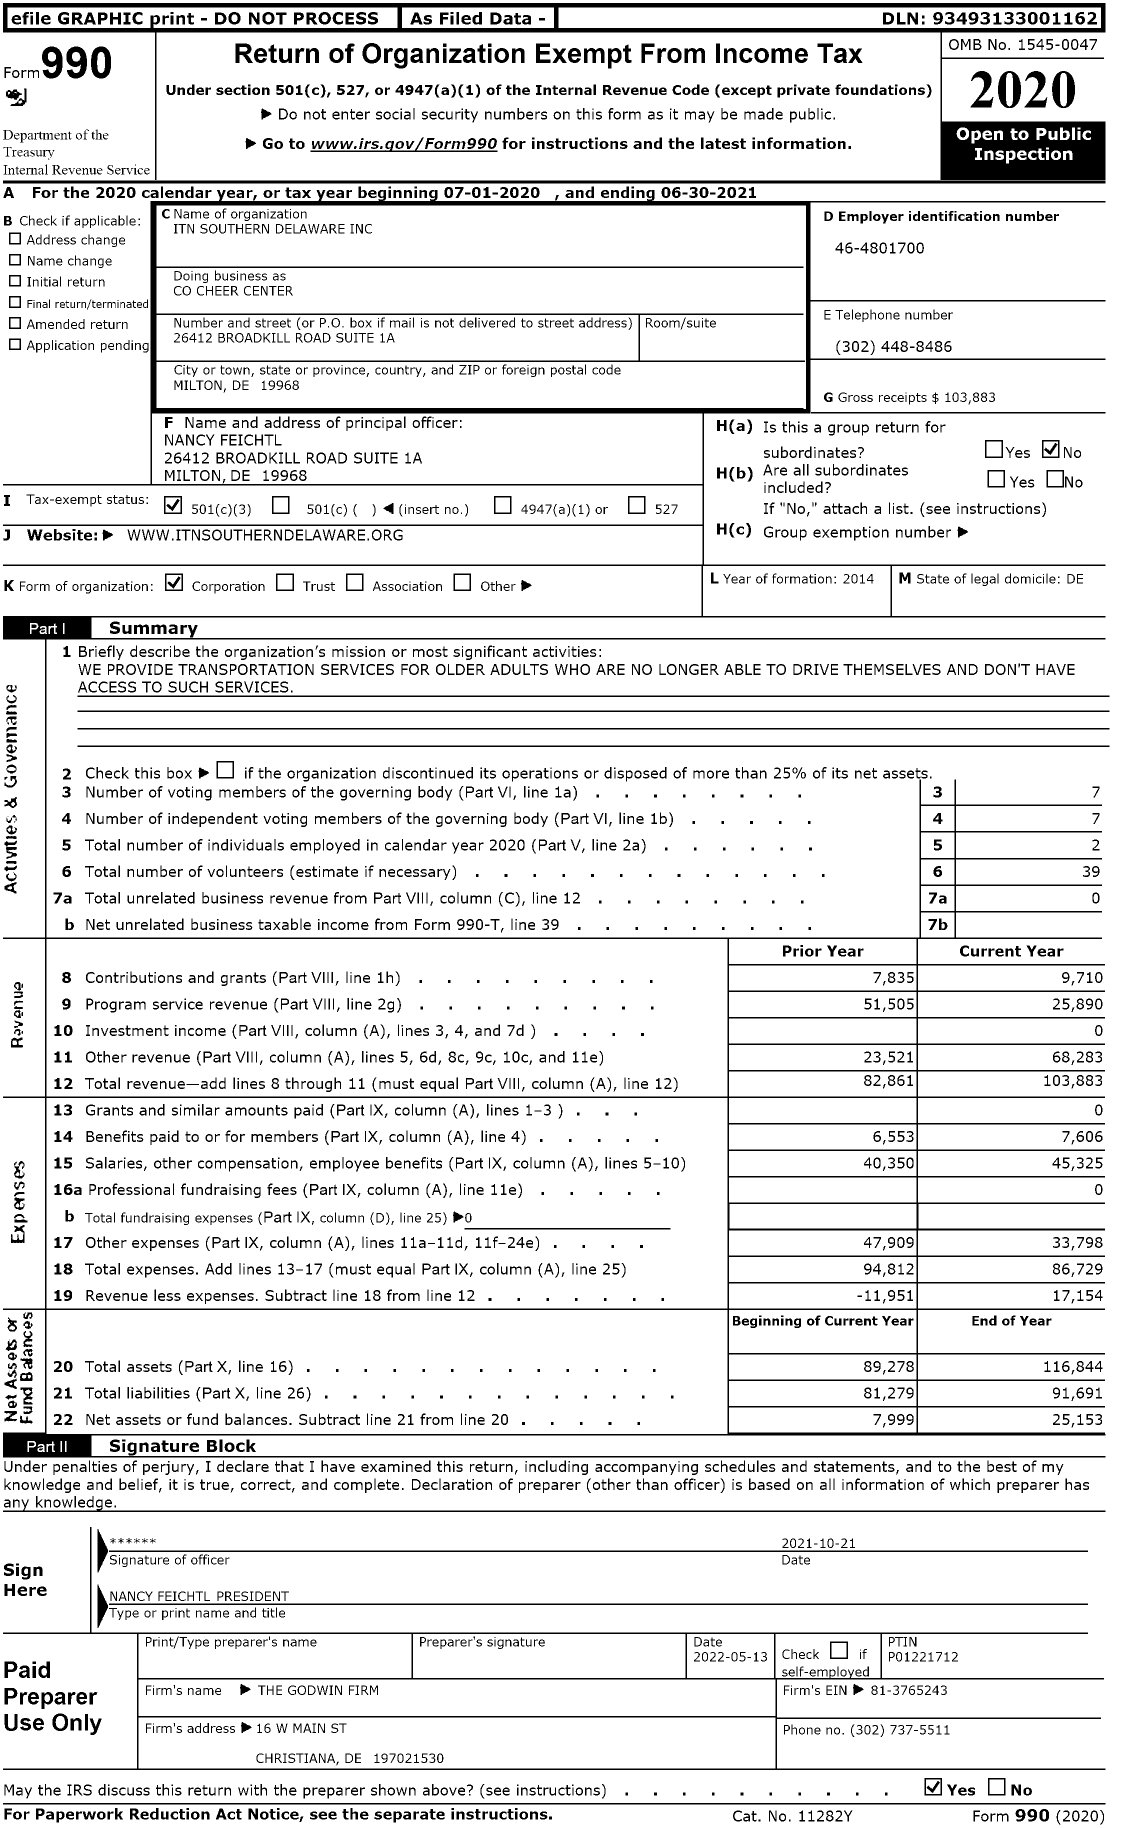 Image of first page of 2020 Form 990 for Itn Southern Delaware